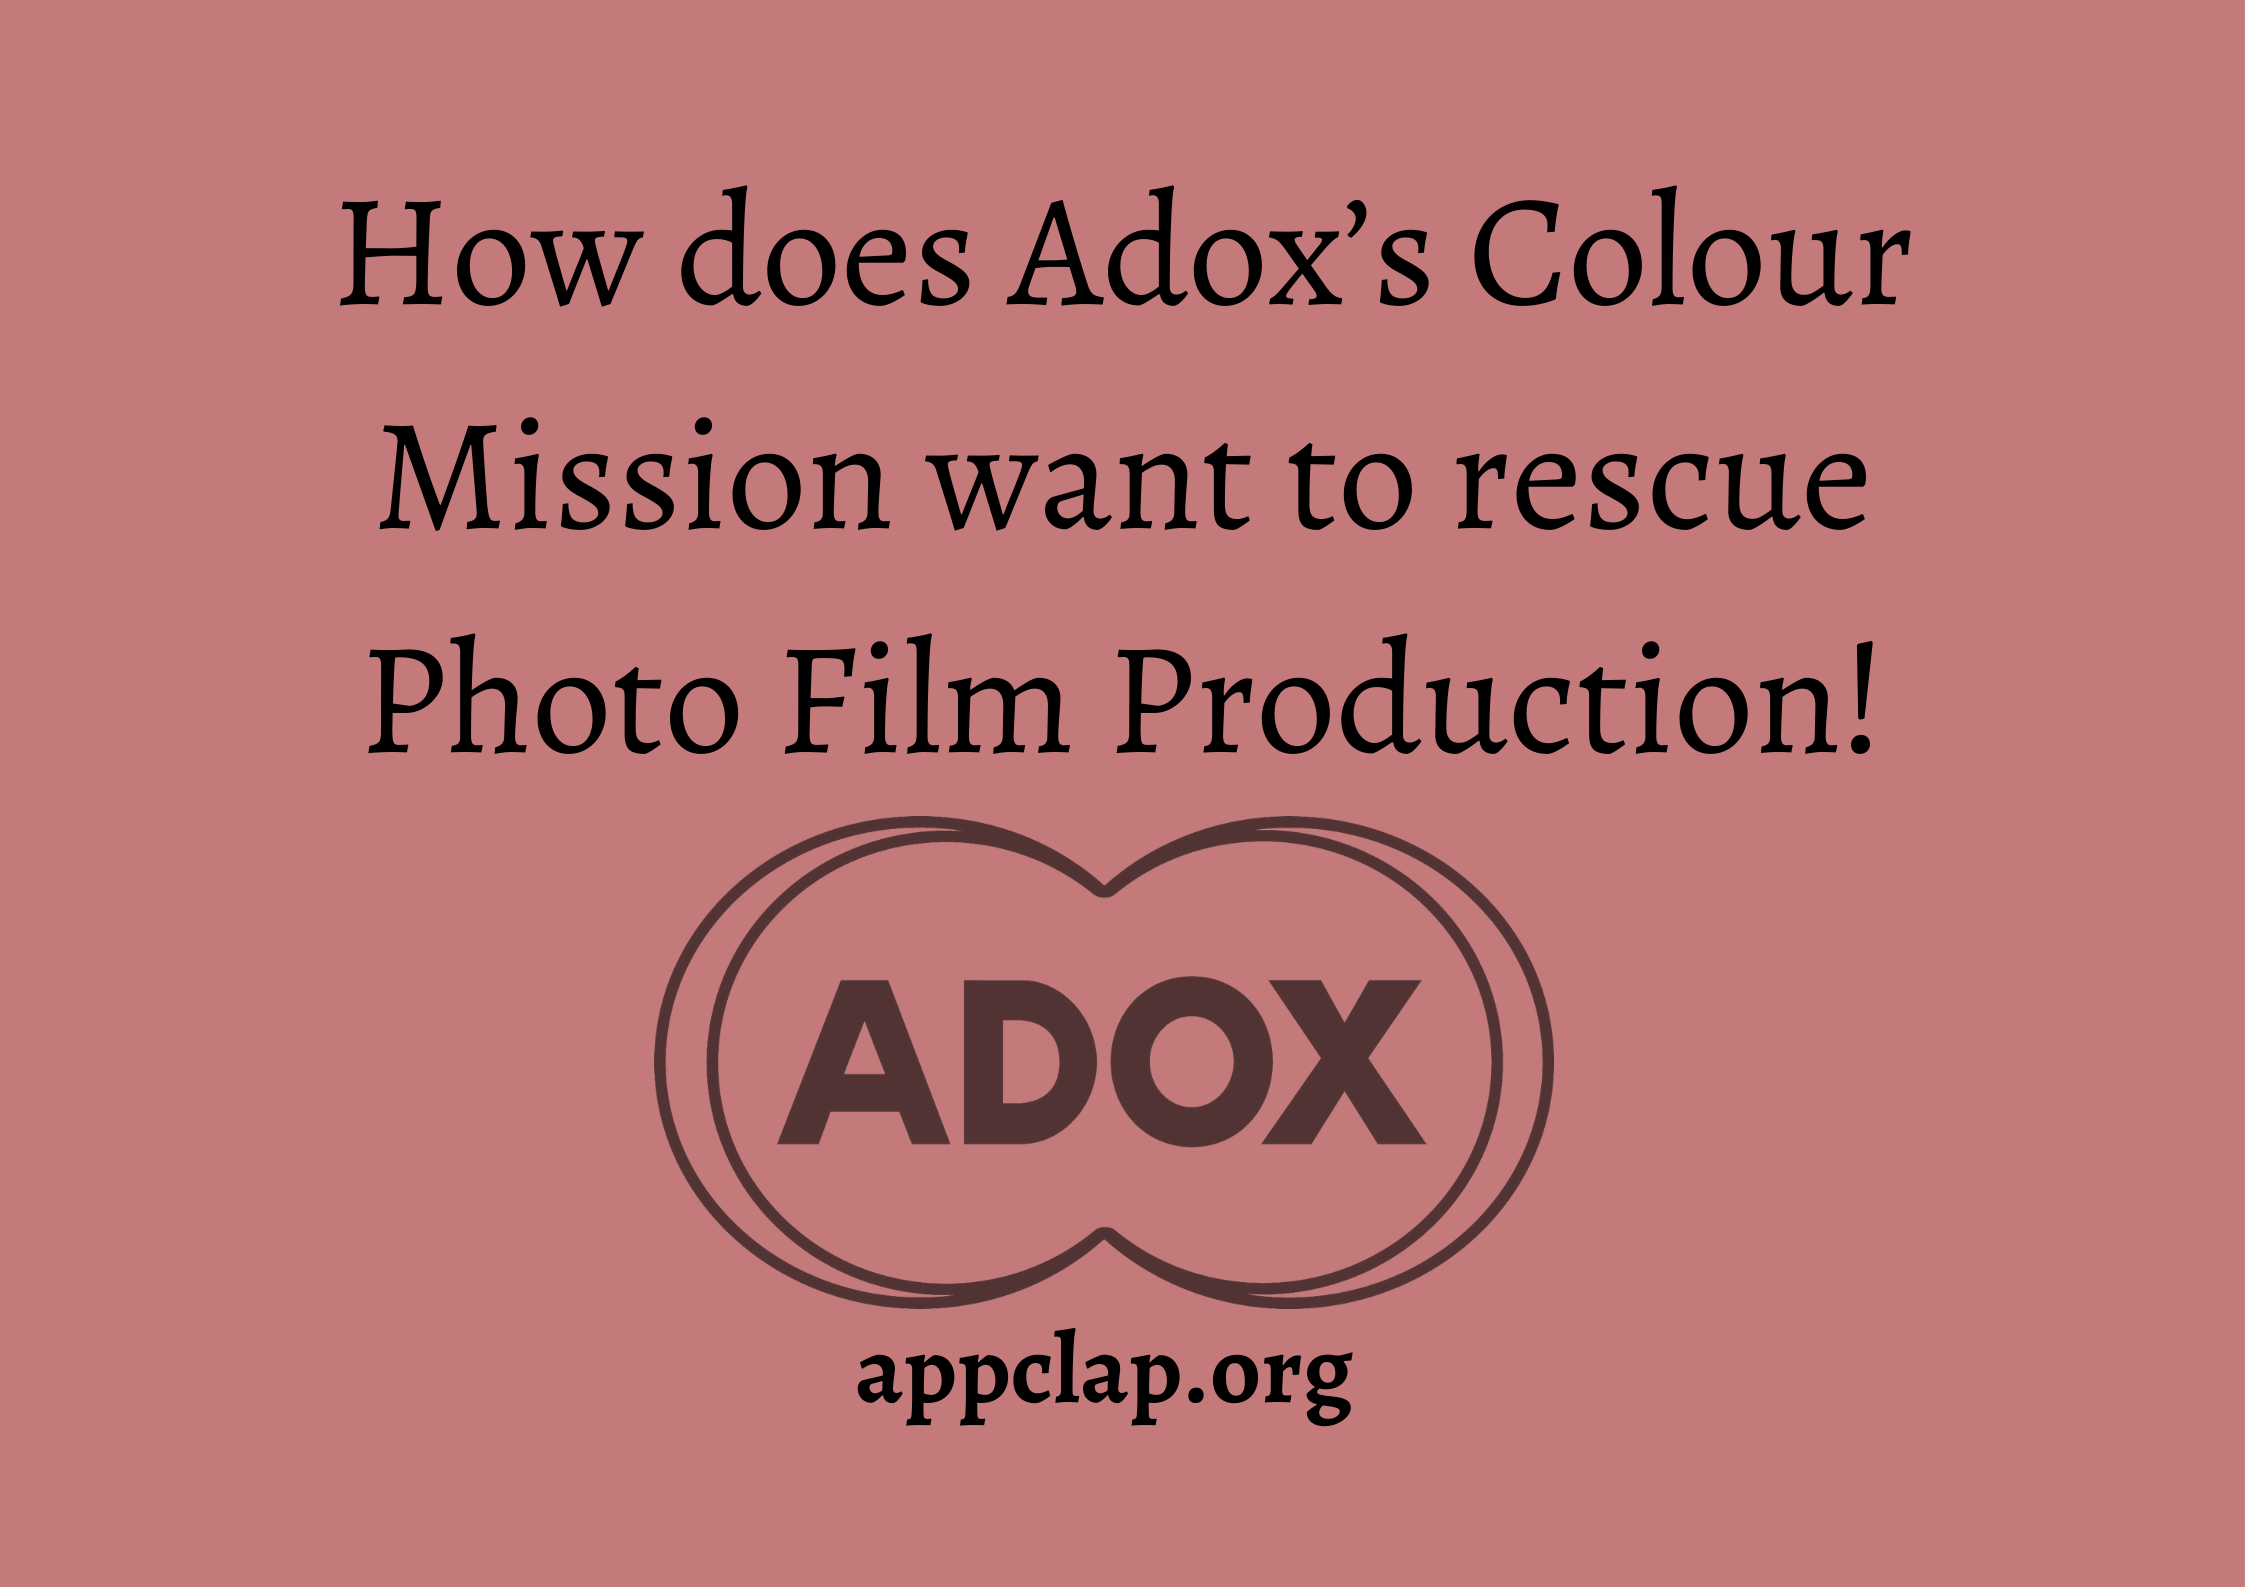 How does Adox’s Colour Mission want to rescue Photo Film Production!